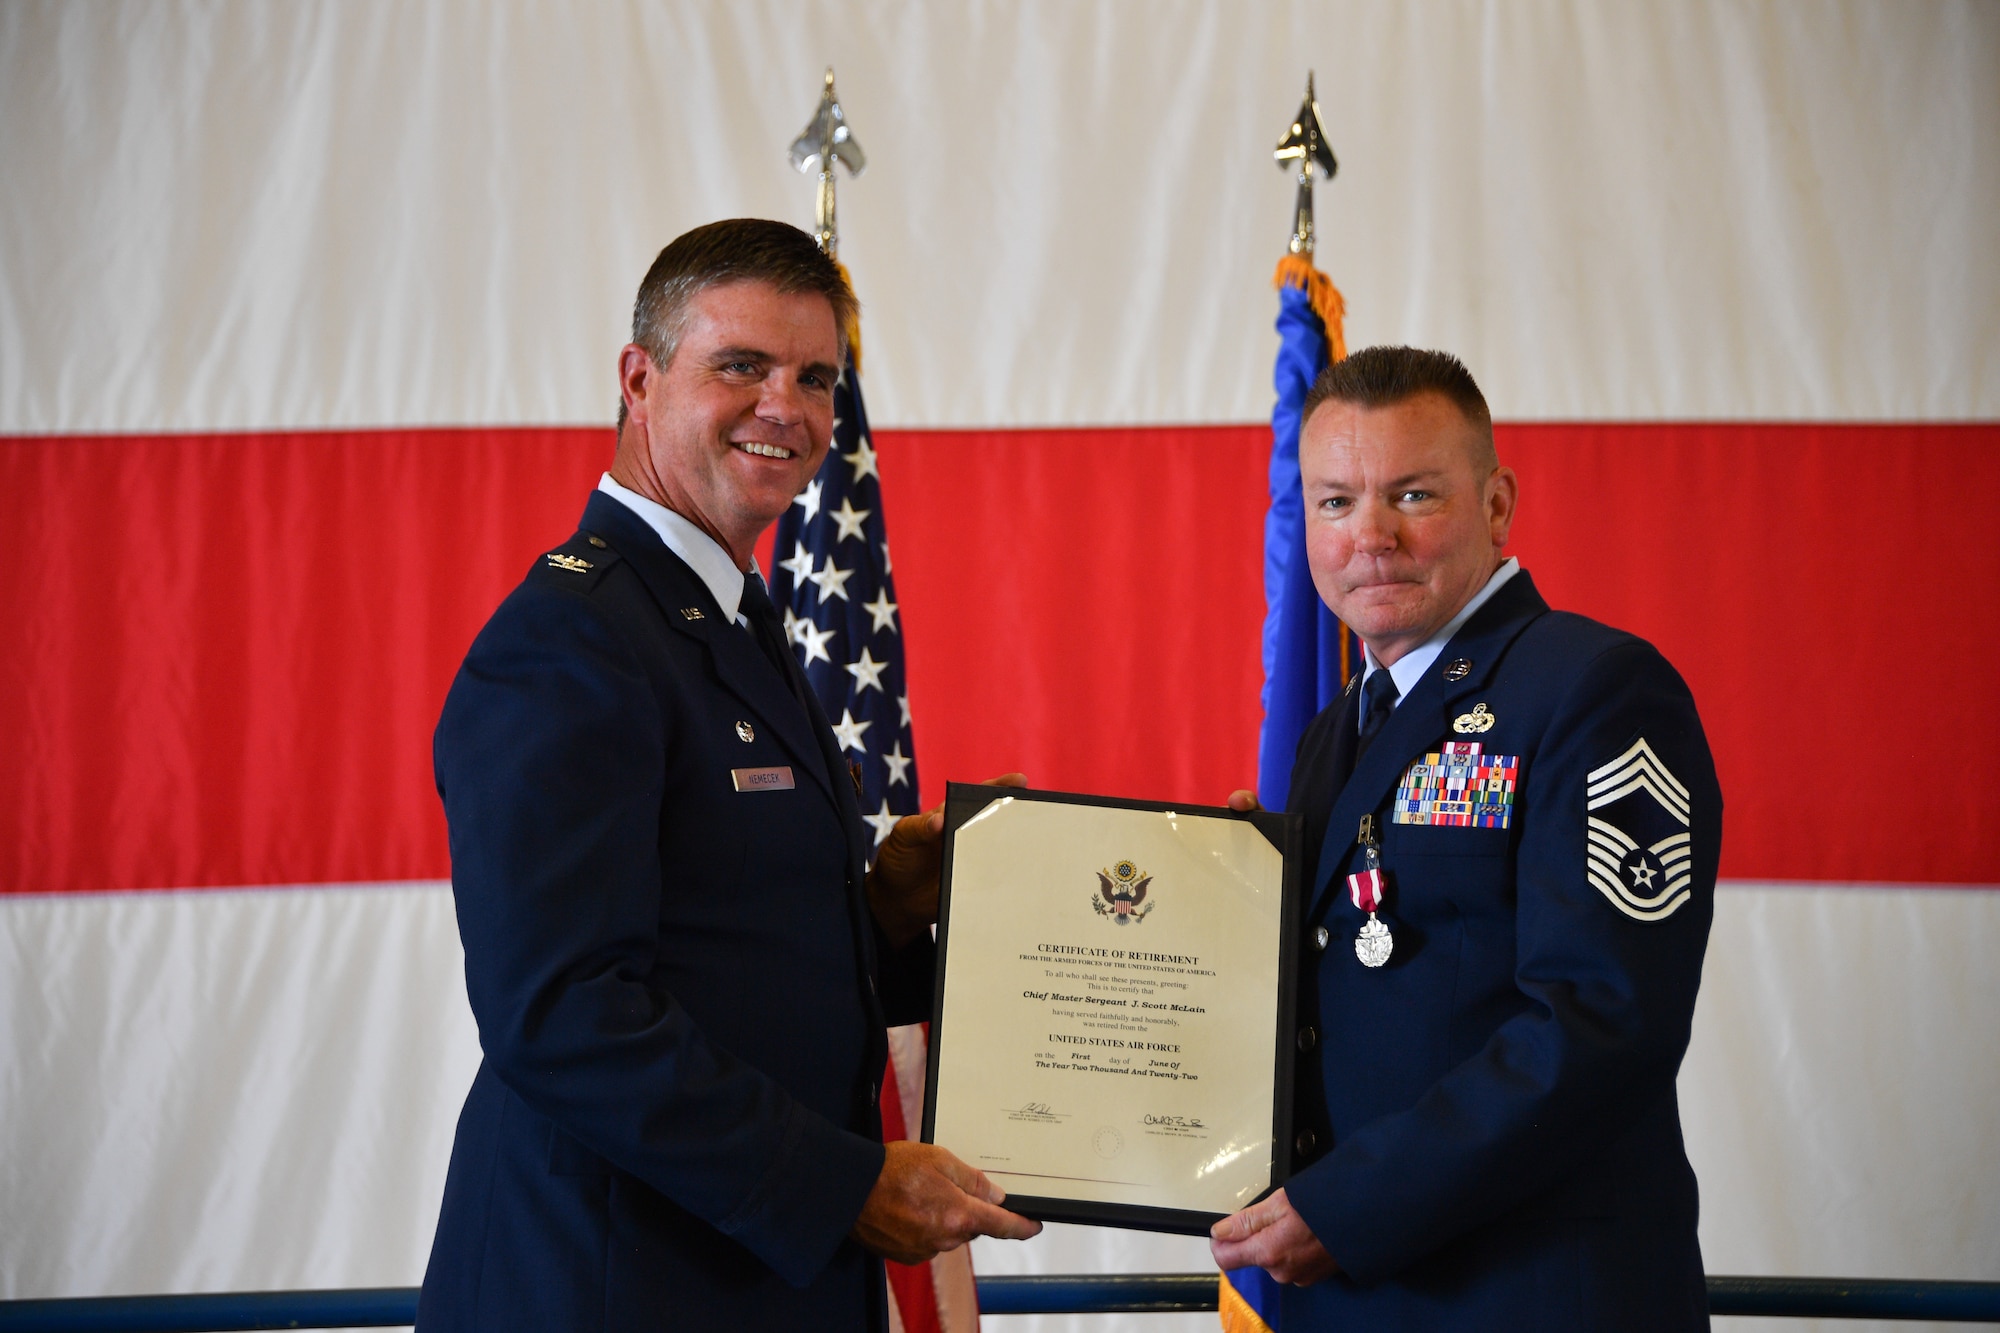 Chief Master Sgt. James S. Mclain, right, 301st Maintenance Squadron senior enlisted leader, receives the Certificate of Retirement from Col. John M. Nemecek, 301st Maintenance Group commander, during Mclains’s retirement ceremony at Naval Air Station Joint Reserve Base Fort Worth, Texas, June 4, 2022. Mclain  honorably served for 27 years. (U.S. Air Force photo by Staff Sgt. Nije Hightower)